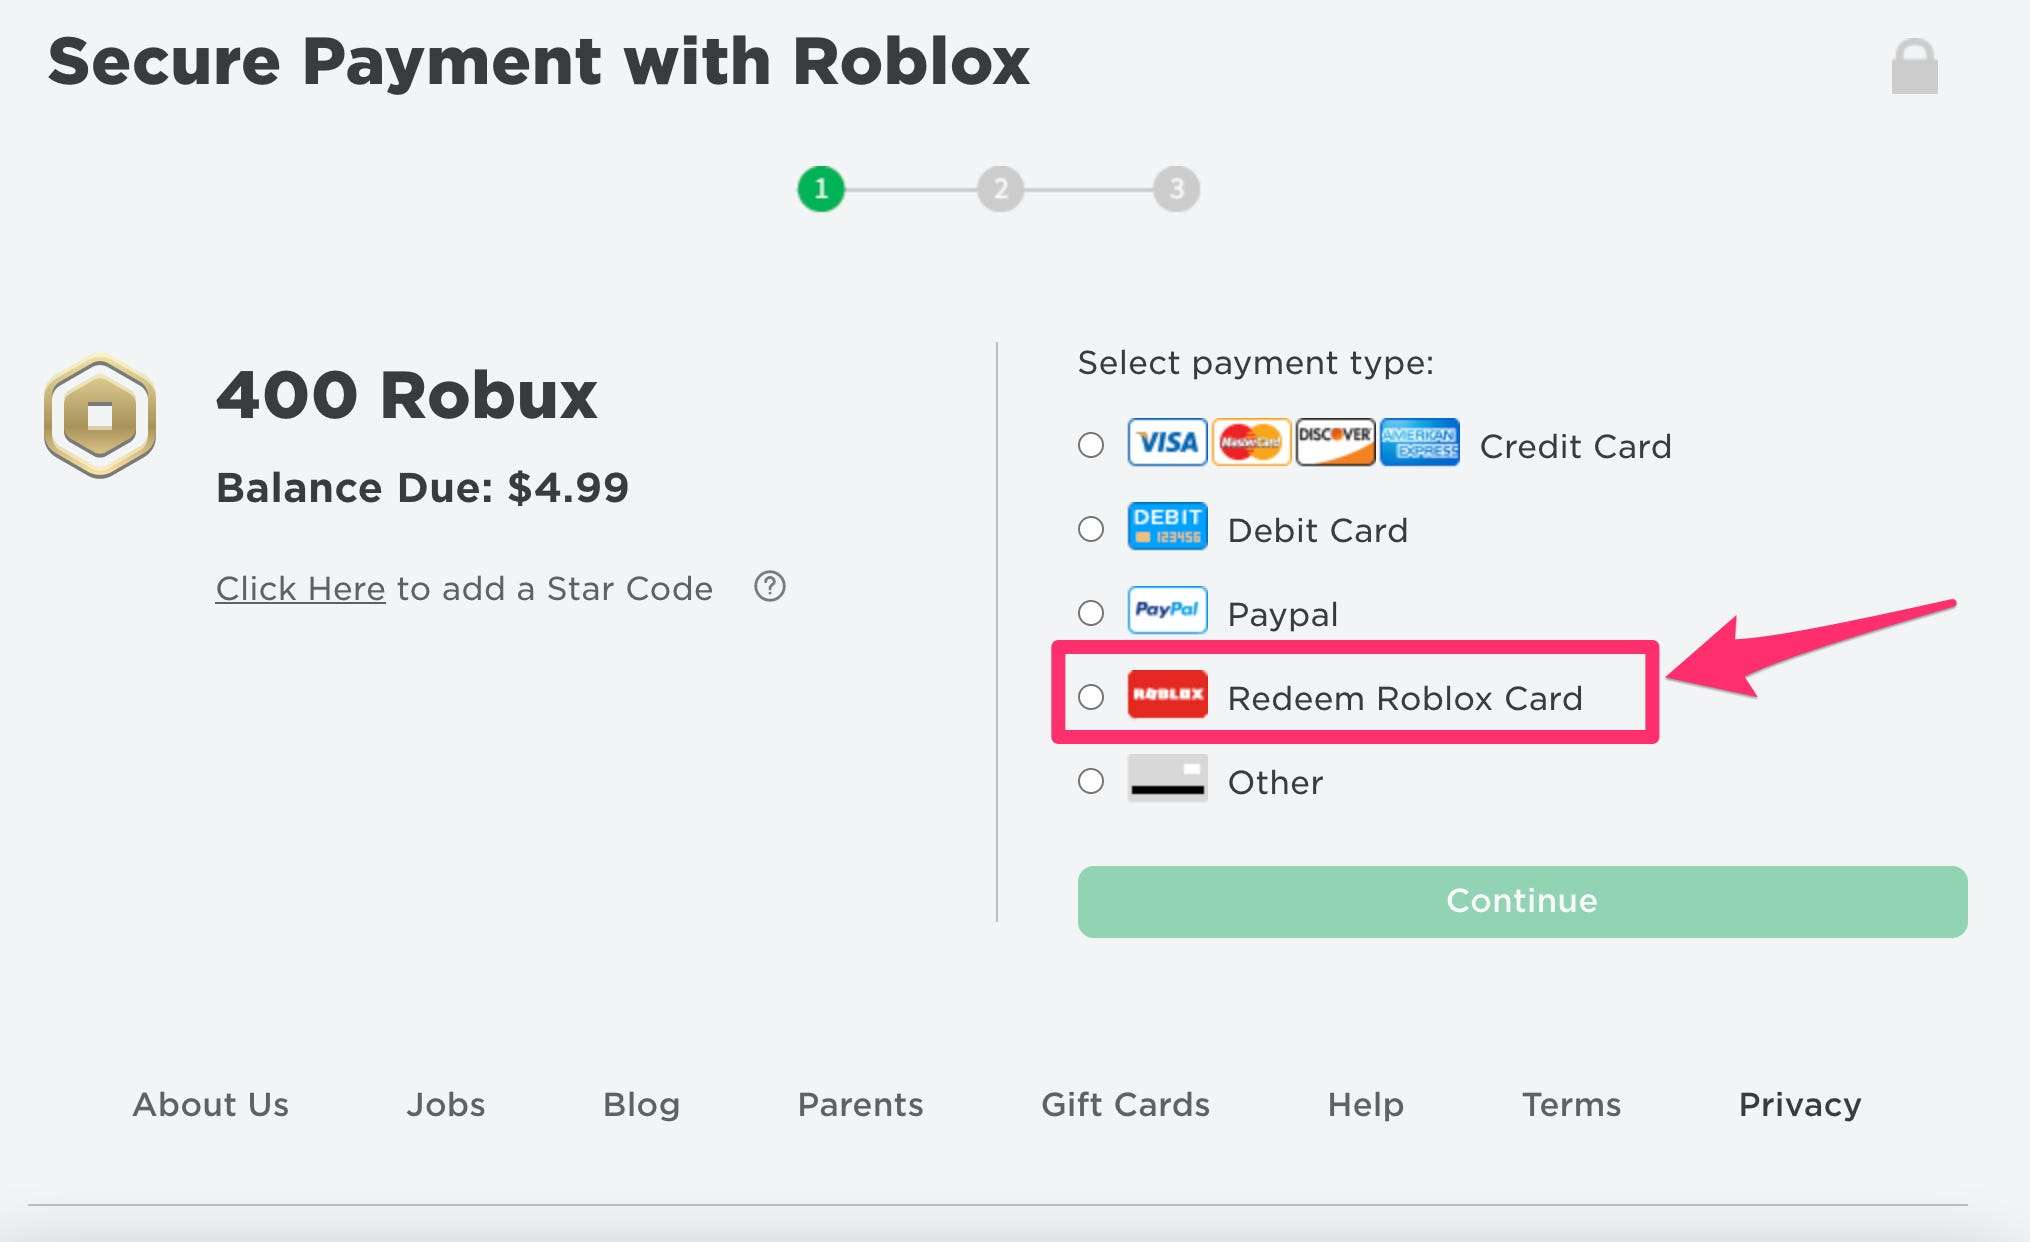 Tips On How To Redeem A Roblox Reward Card In 2 Other Ways So You Should Buy In Game Equipment And Upgrades Mailinvest Blog Best Tech News Blog - star code to get free robux